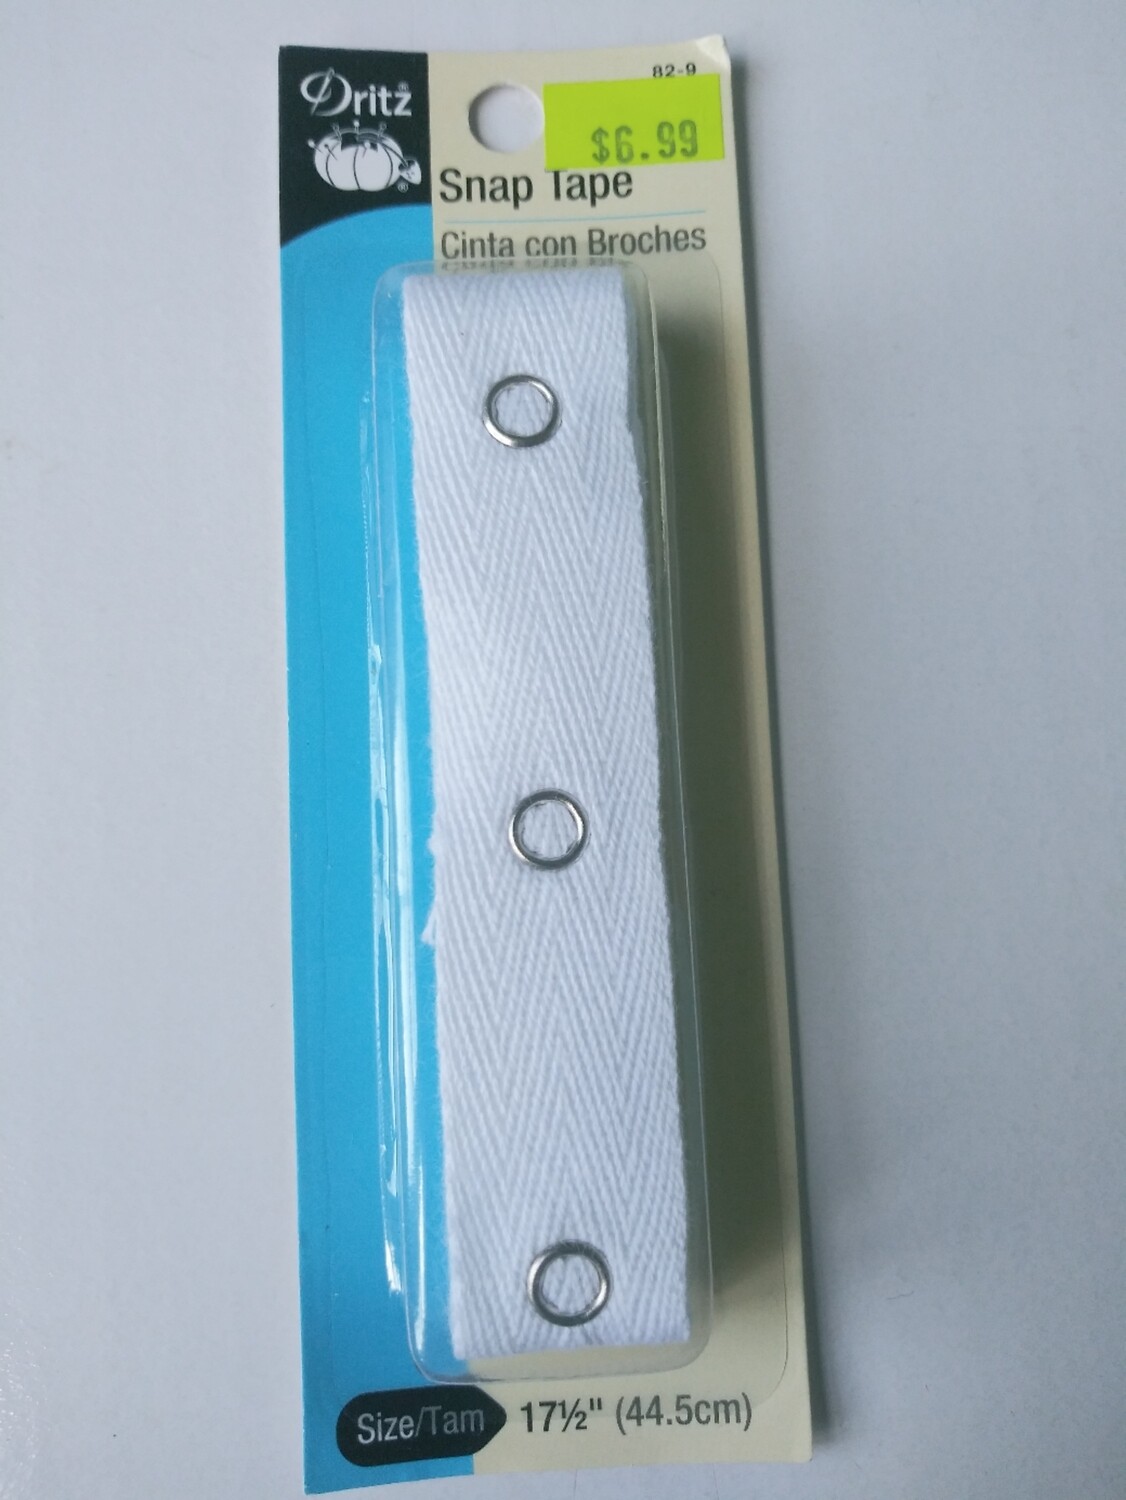 Dritz Snap Tape, Size 17-1/2 in.